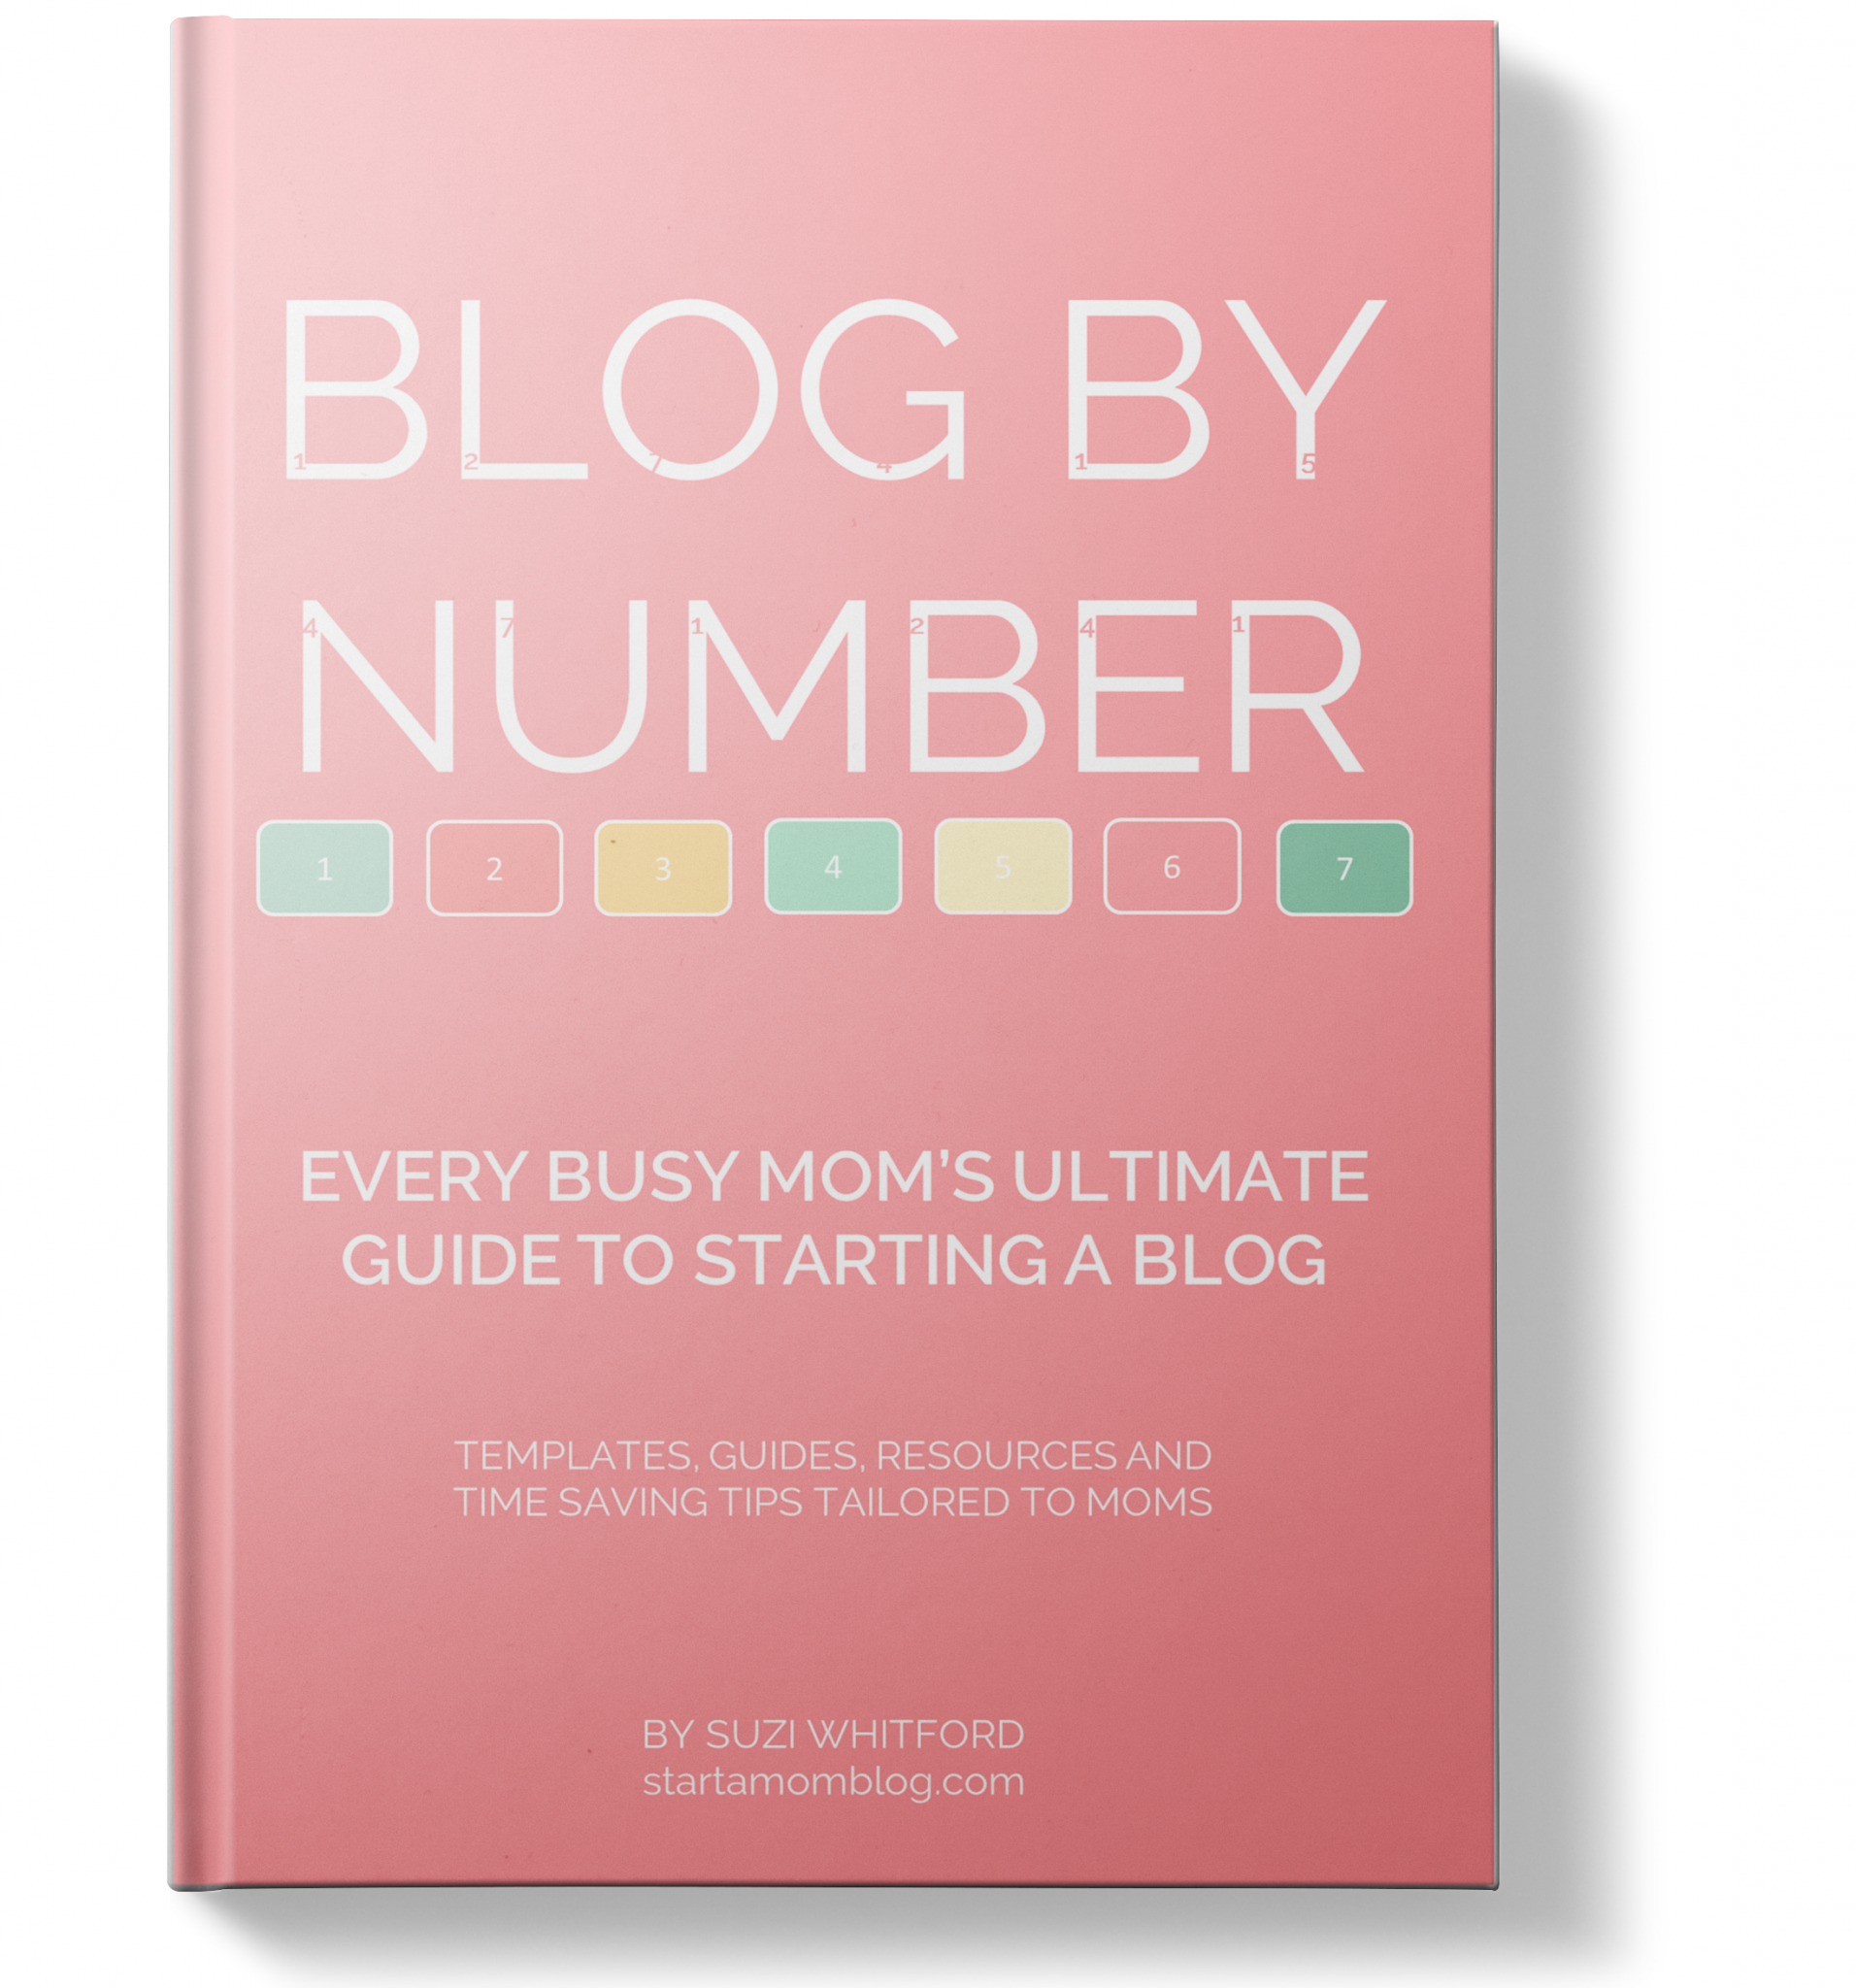 Blog by Number